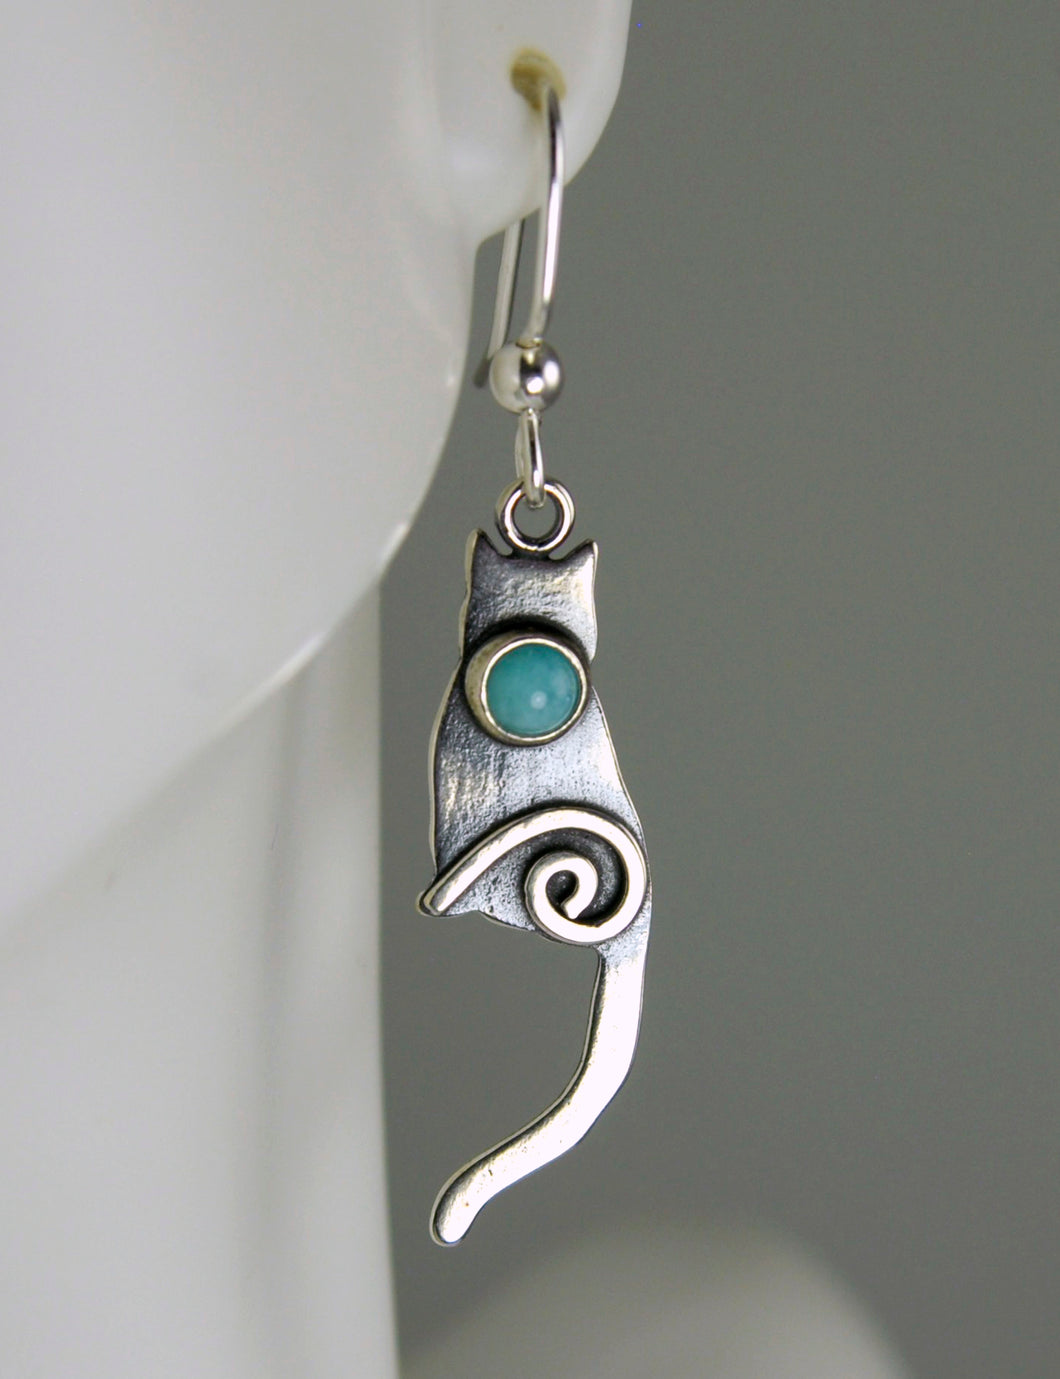 Shiny Sterling Silver Cat Earrings set with Amazonite Cabochons CE2j, Lois Linn Jewelry